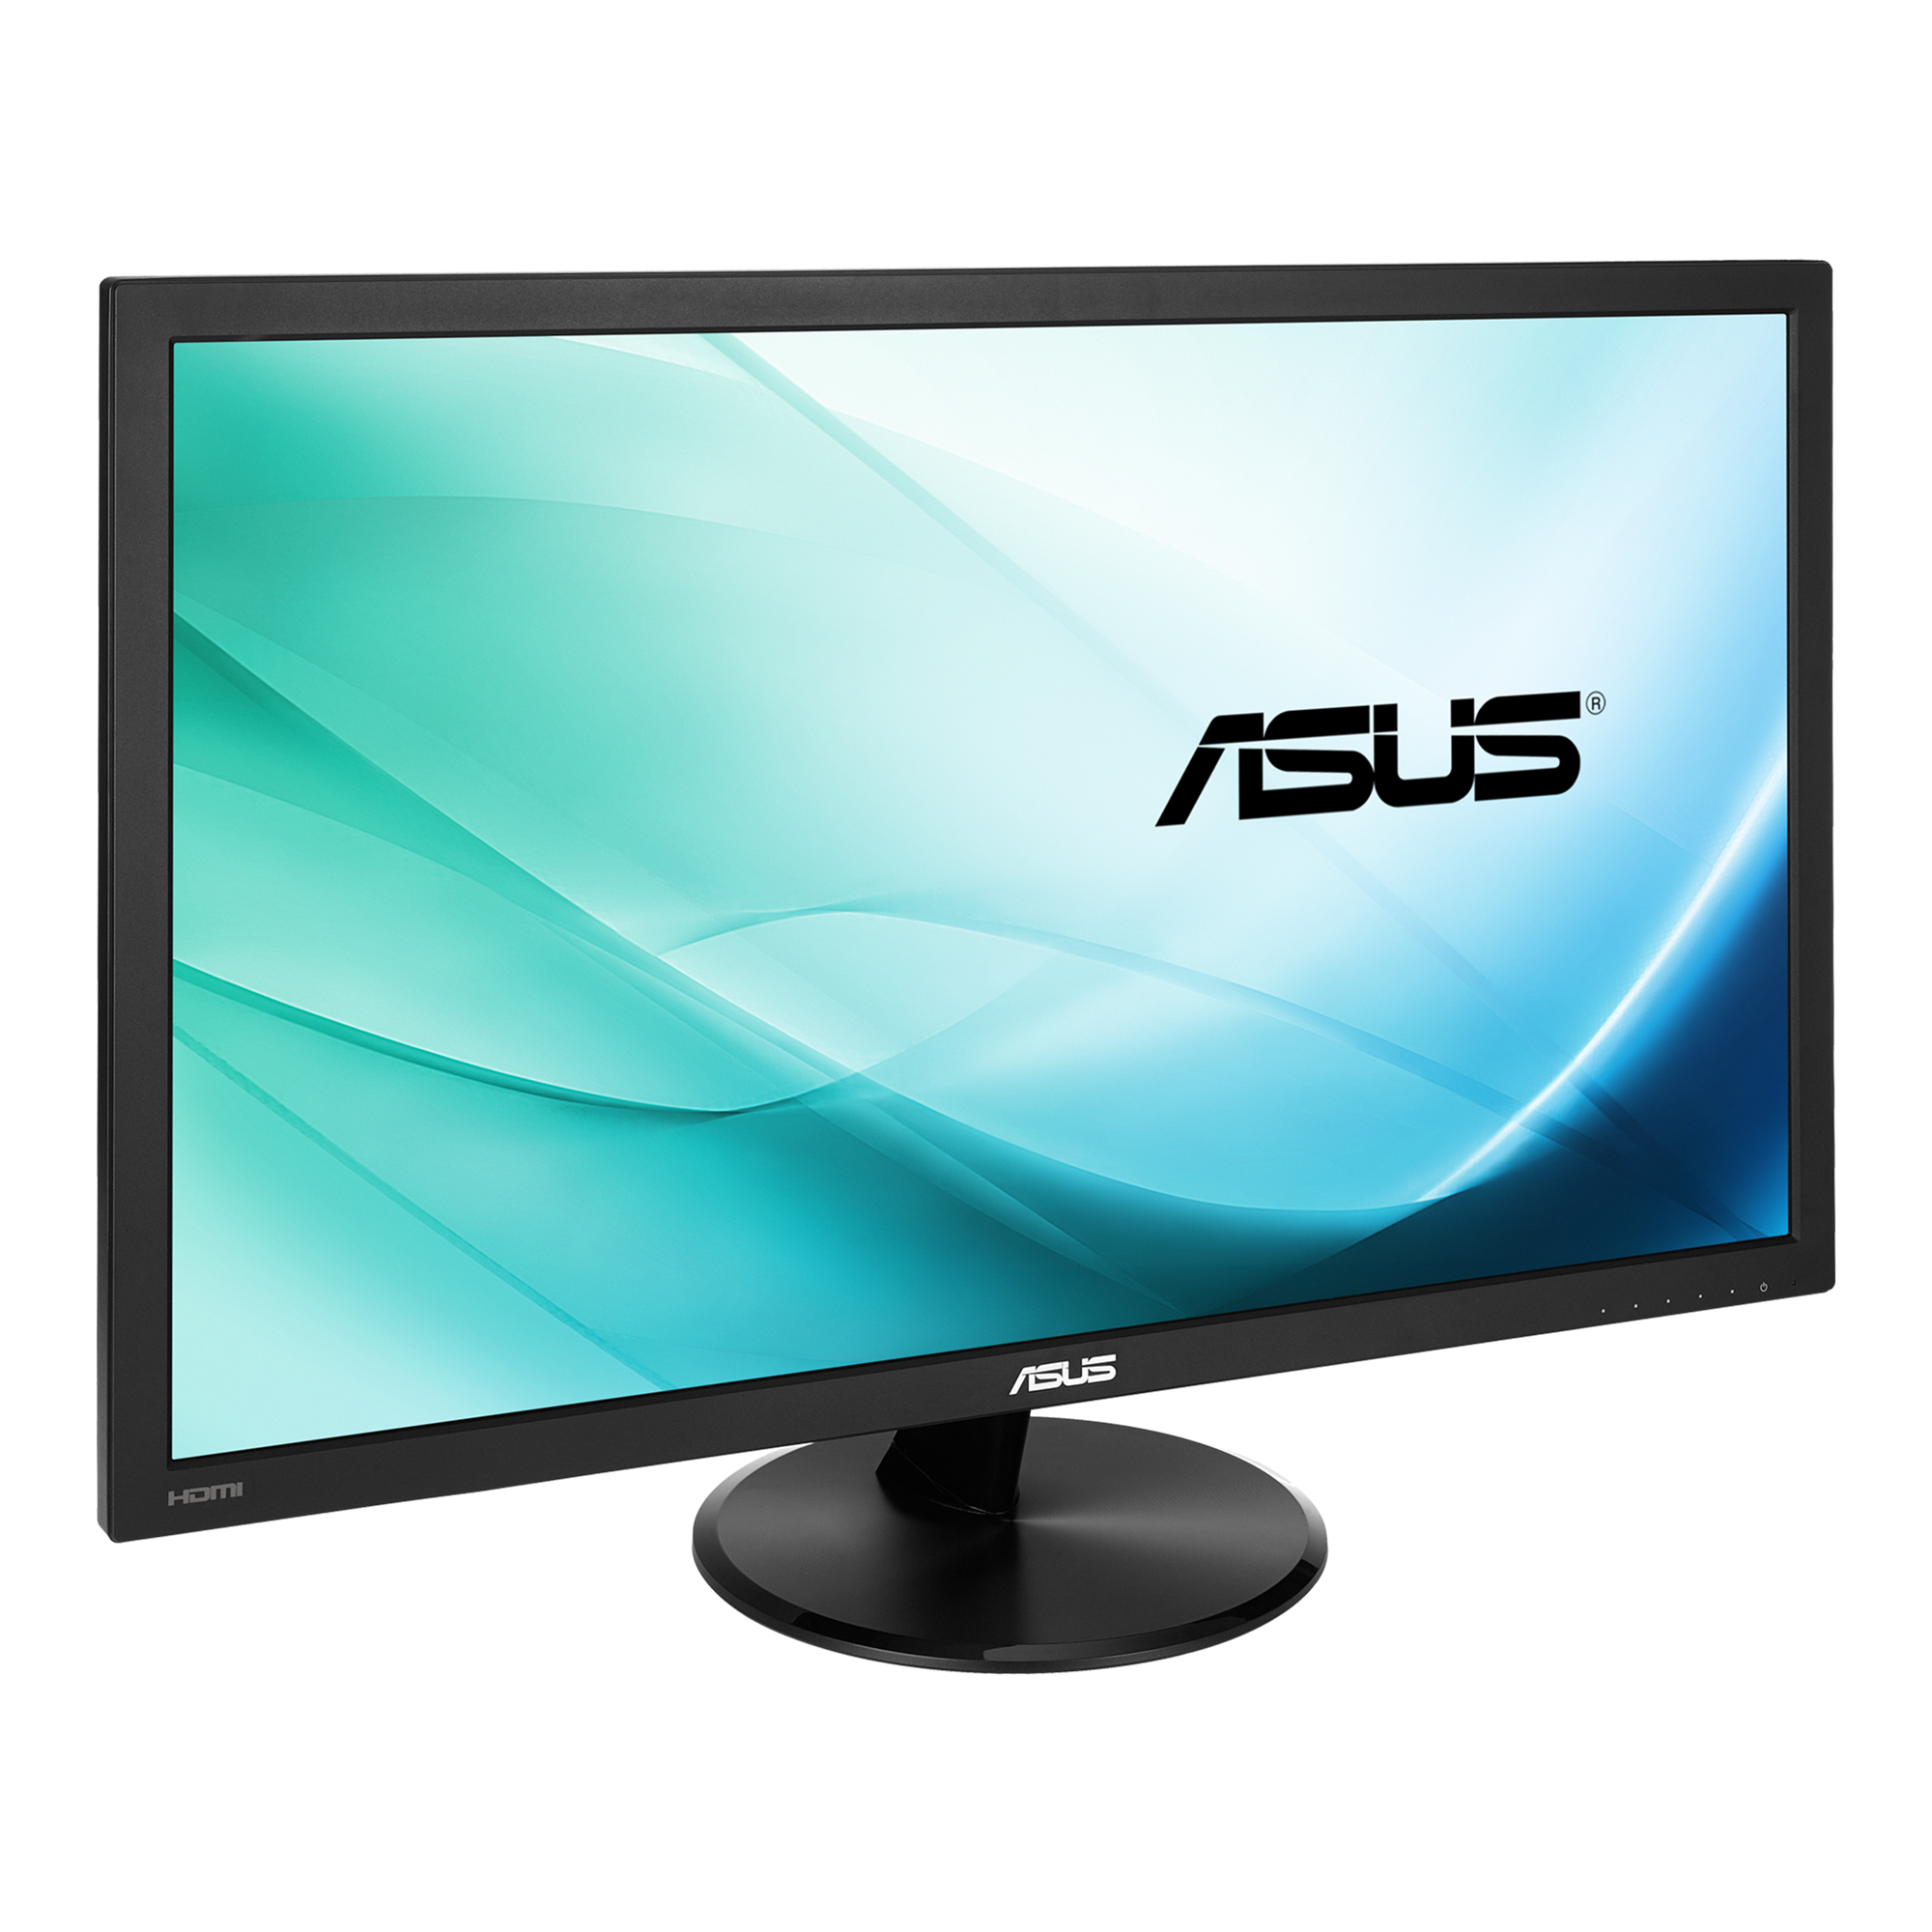 stamp All kinds of agitation VP228HE｜Monitors｜ASUS Global